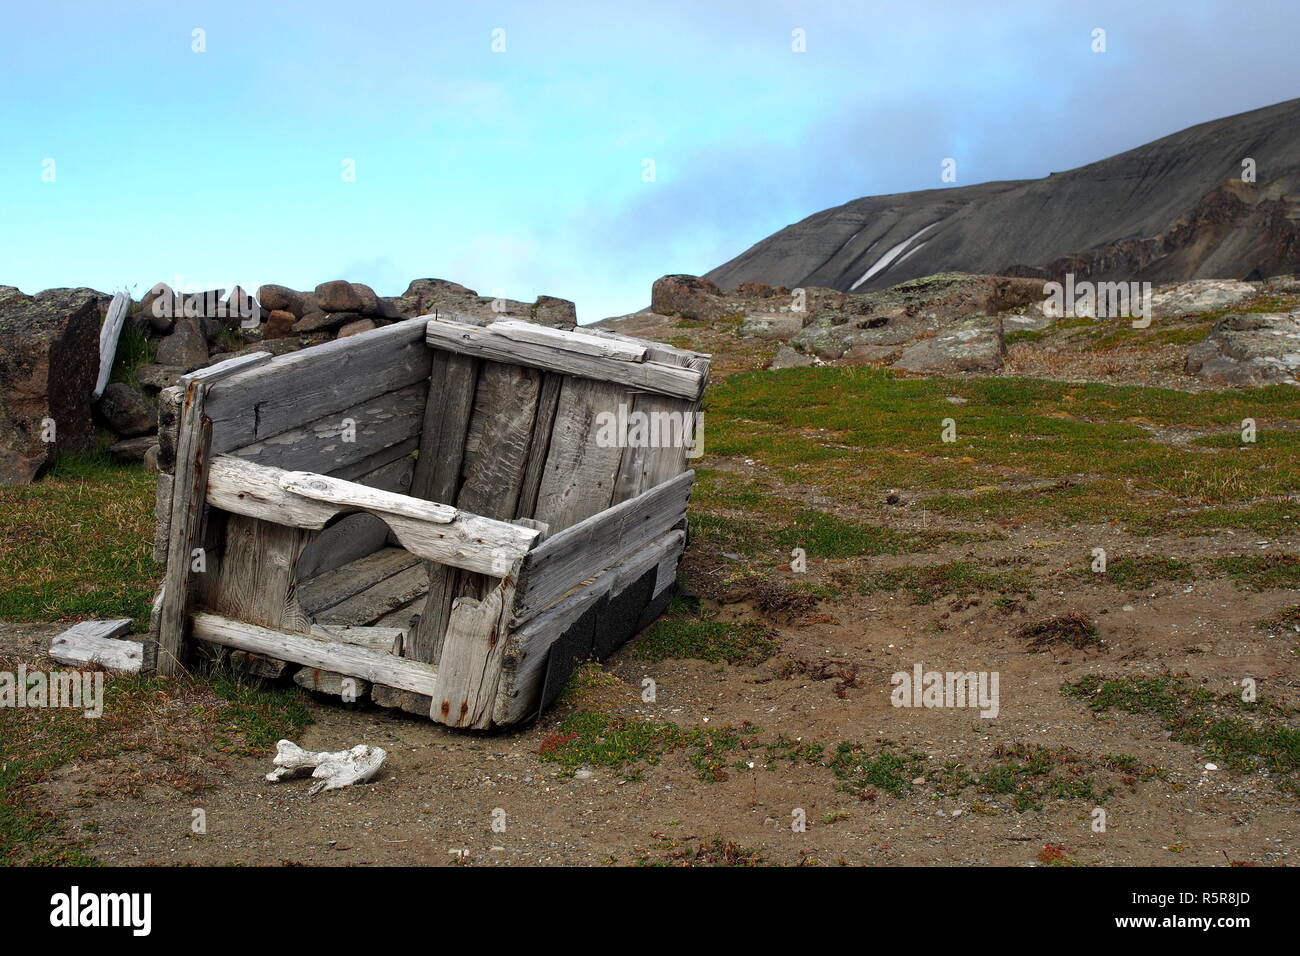 Doghouse remains at Kapp Lee, Svalbard Stock Photo